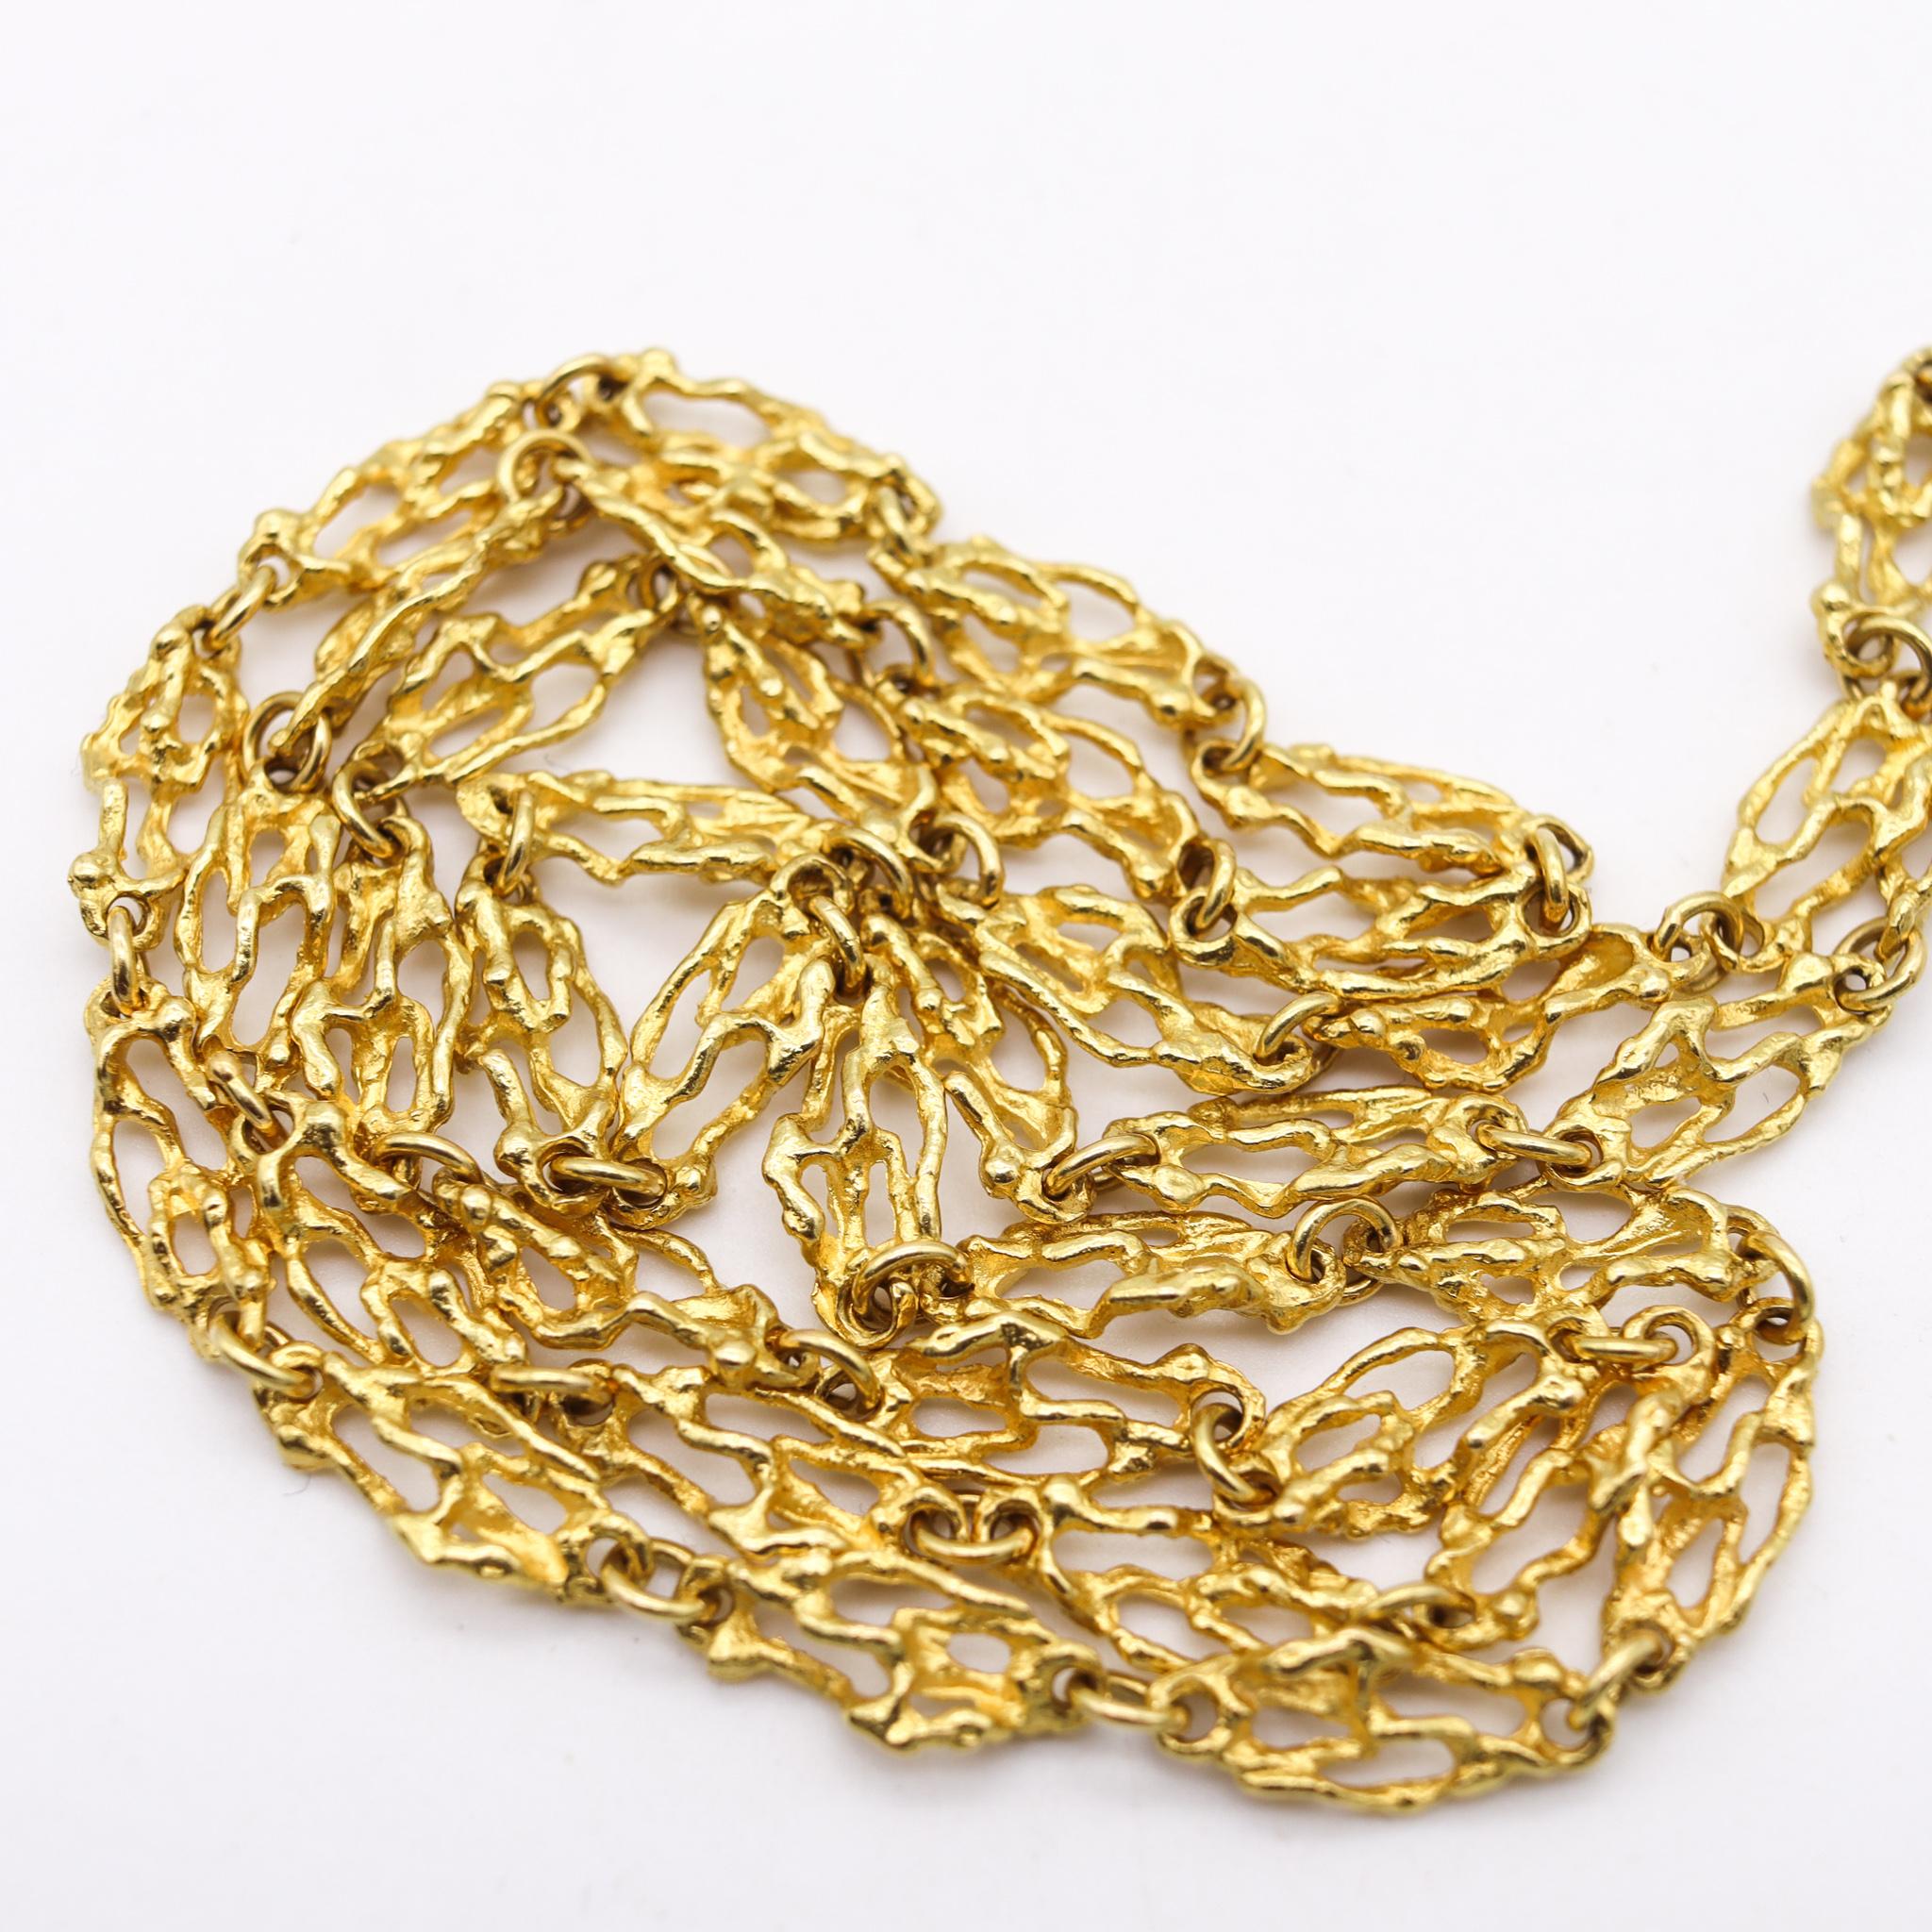 Retro 1970 Modernist Chain with Organic Textured Links in 18Kt Yellow Gold For Sale 1